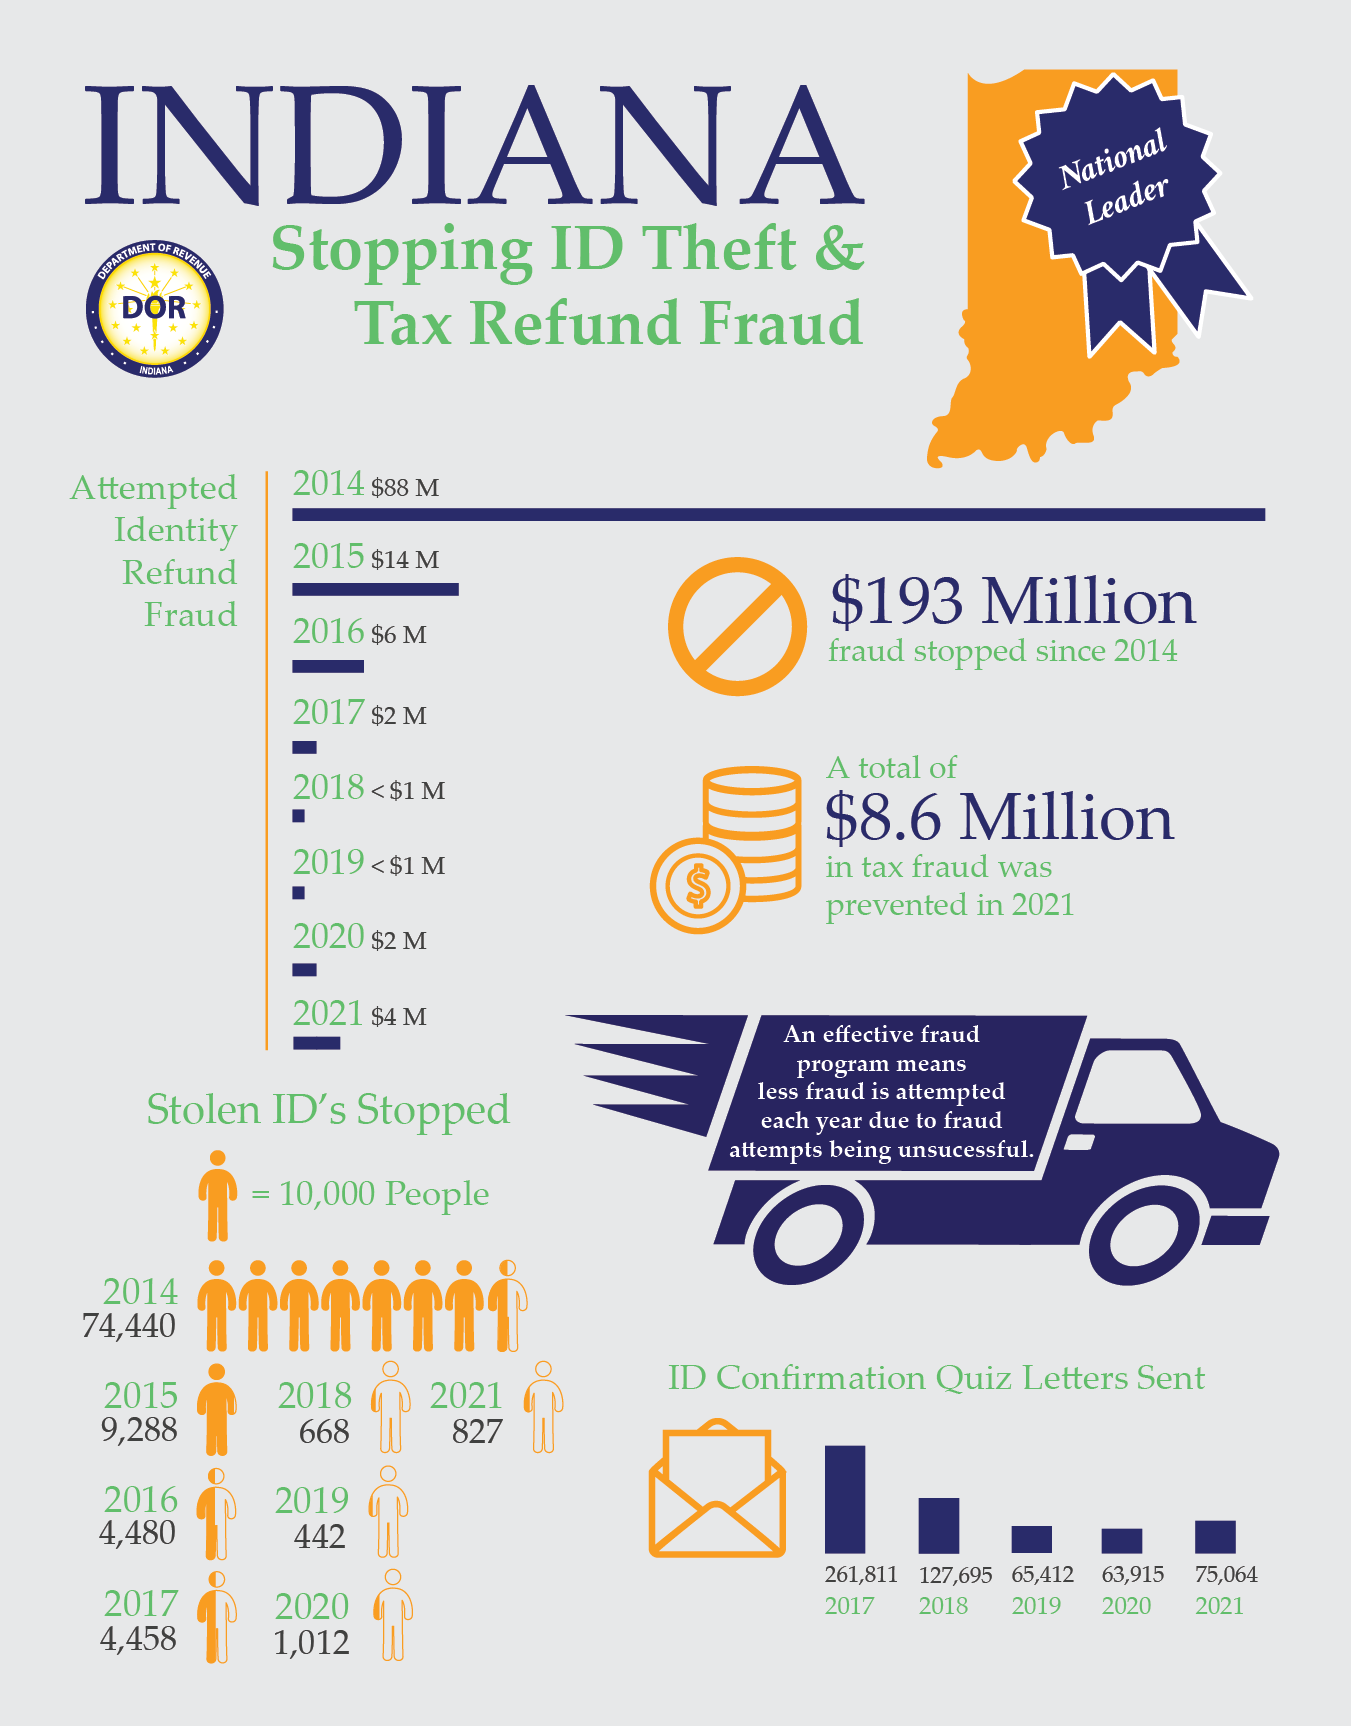 DOR stopping ID theft and tax refund fraud infographic